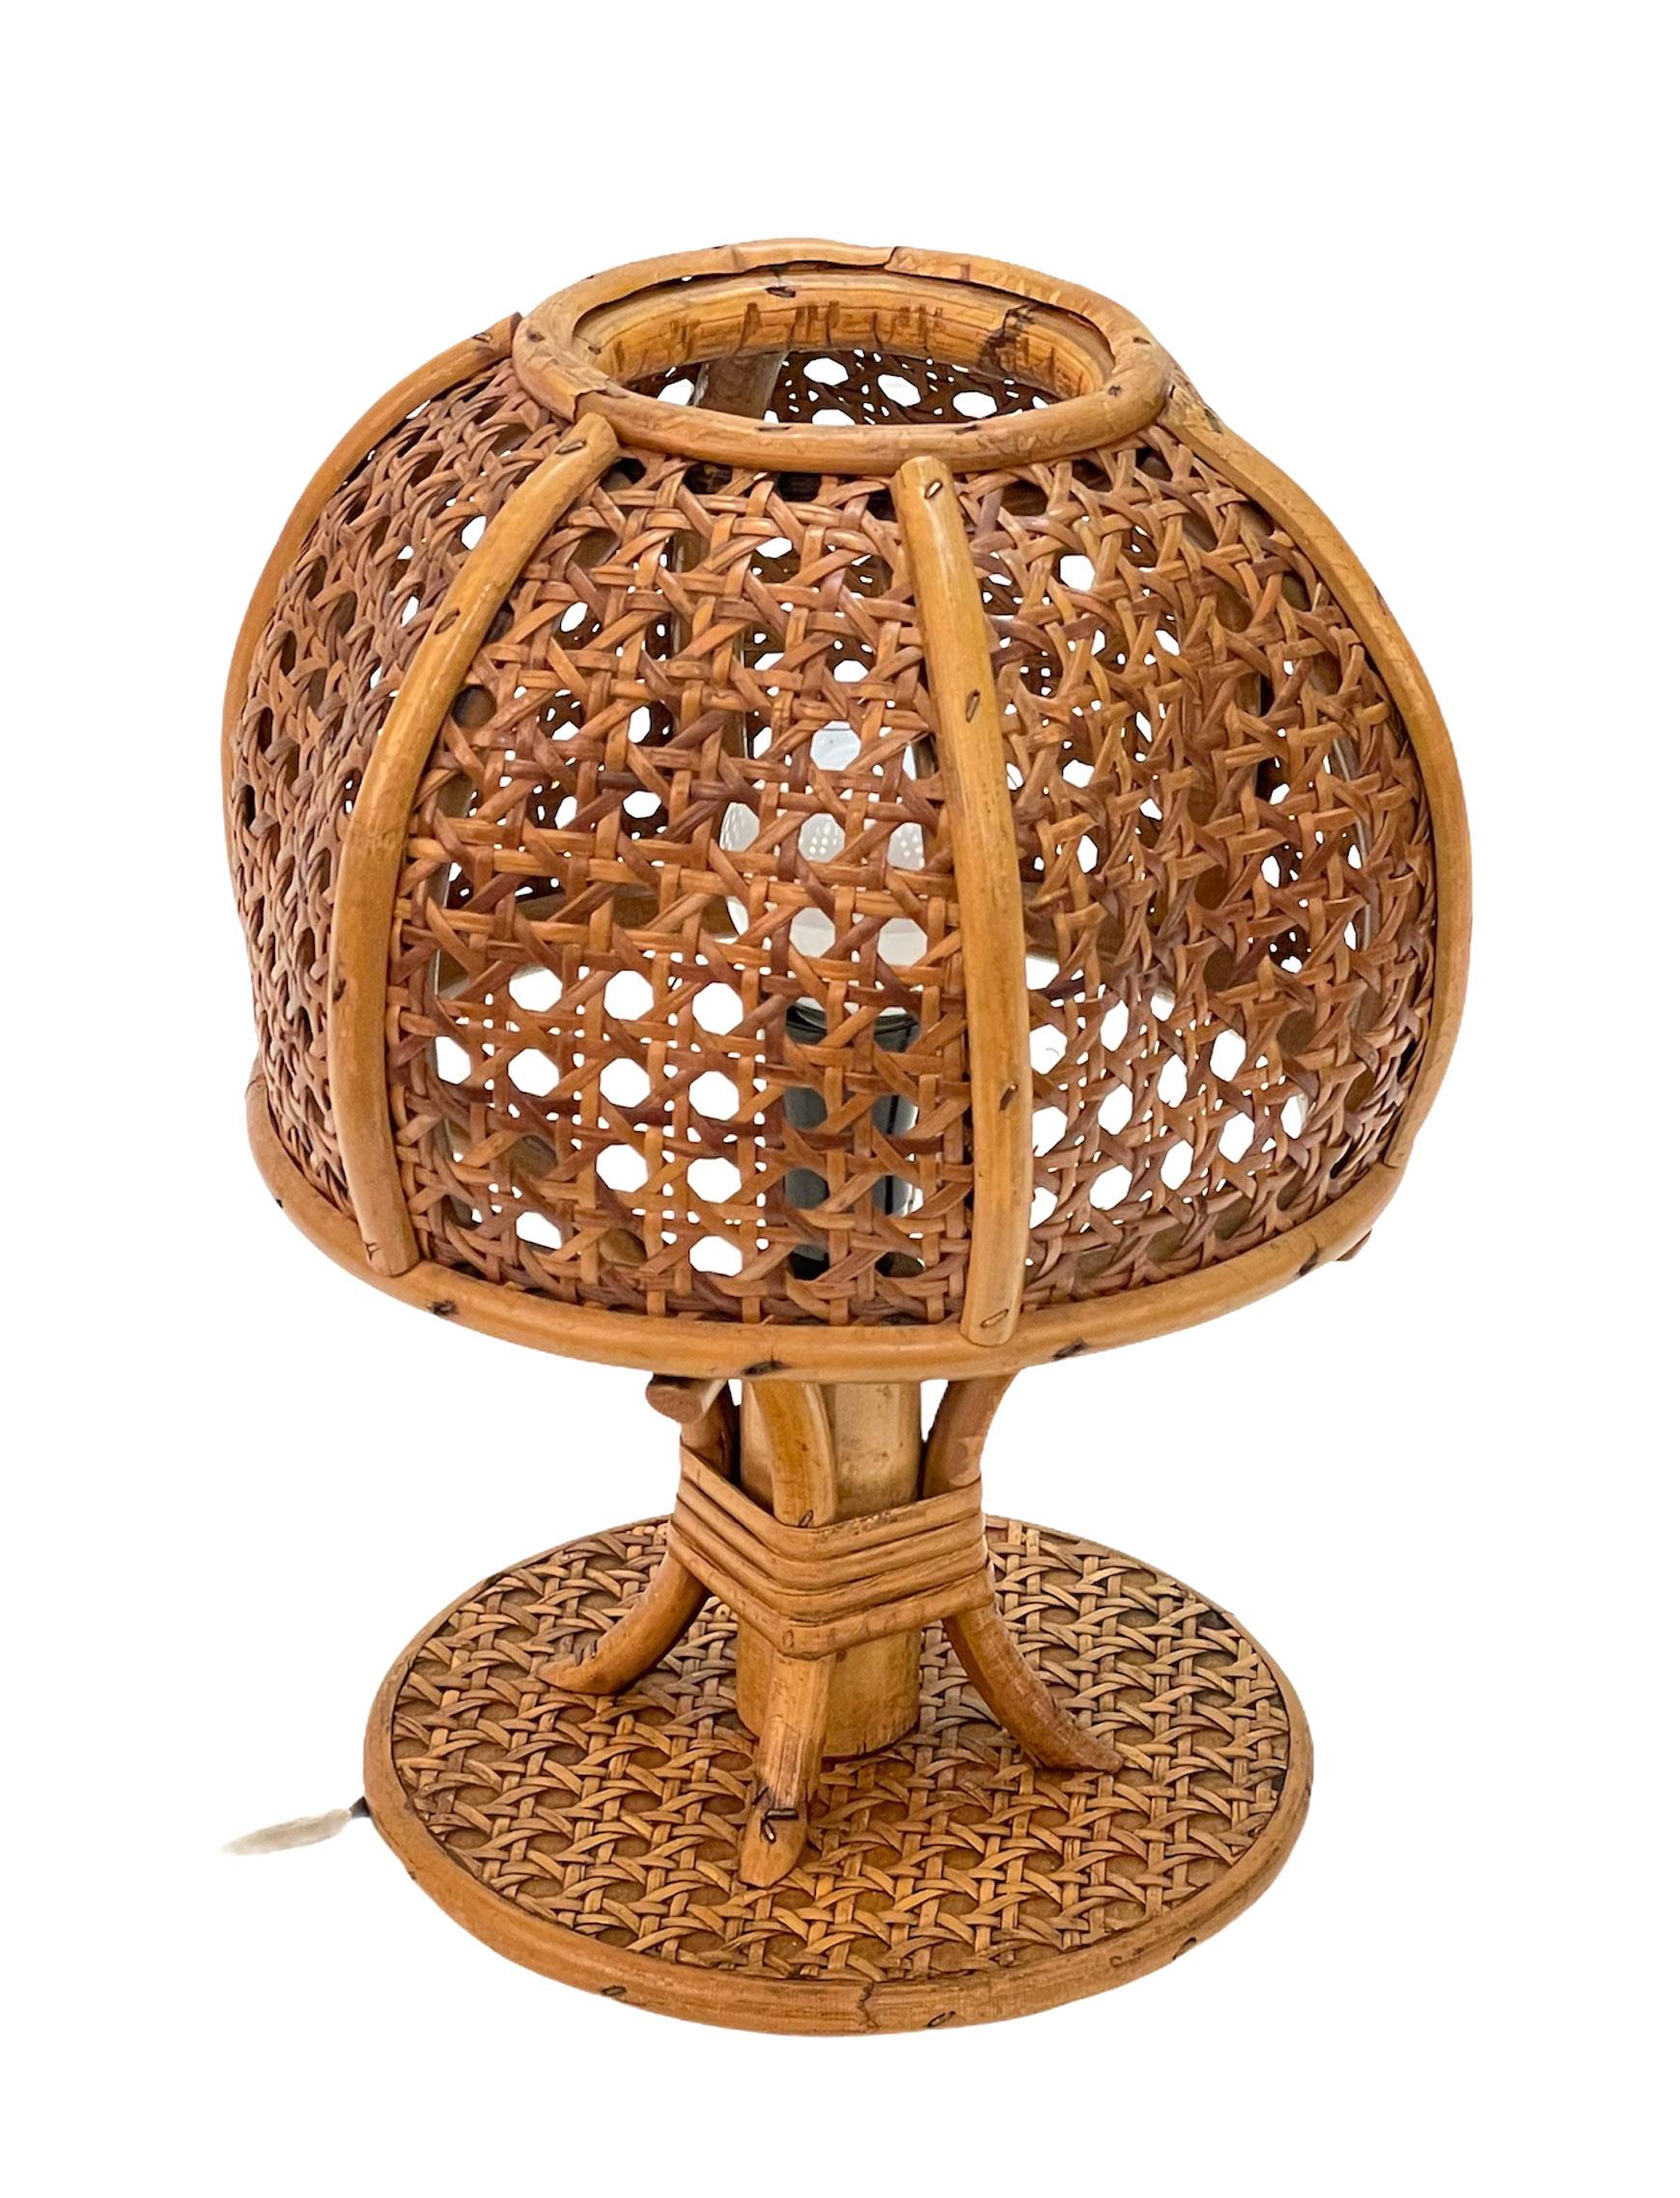 20th Century Midcentury Wicker and Rattan Italian Table Lamp, 1960s For Sale